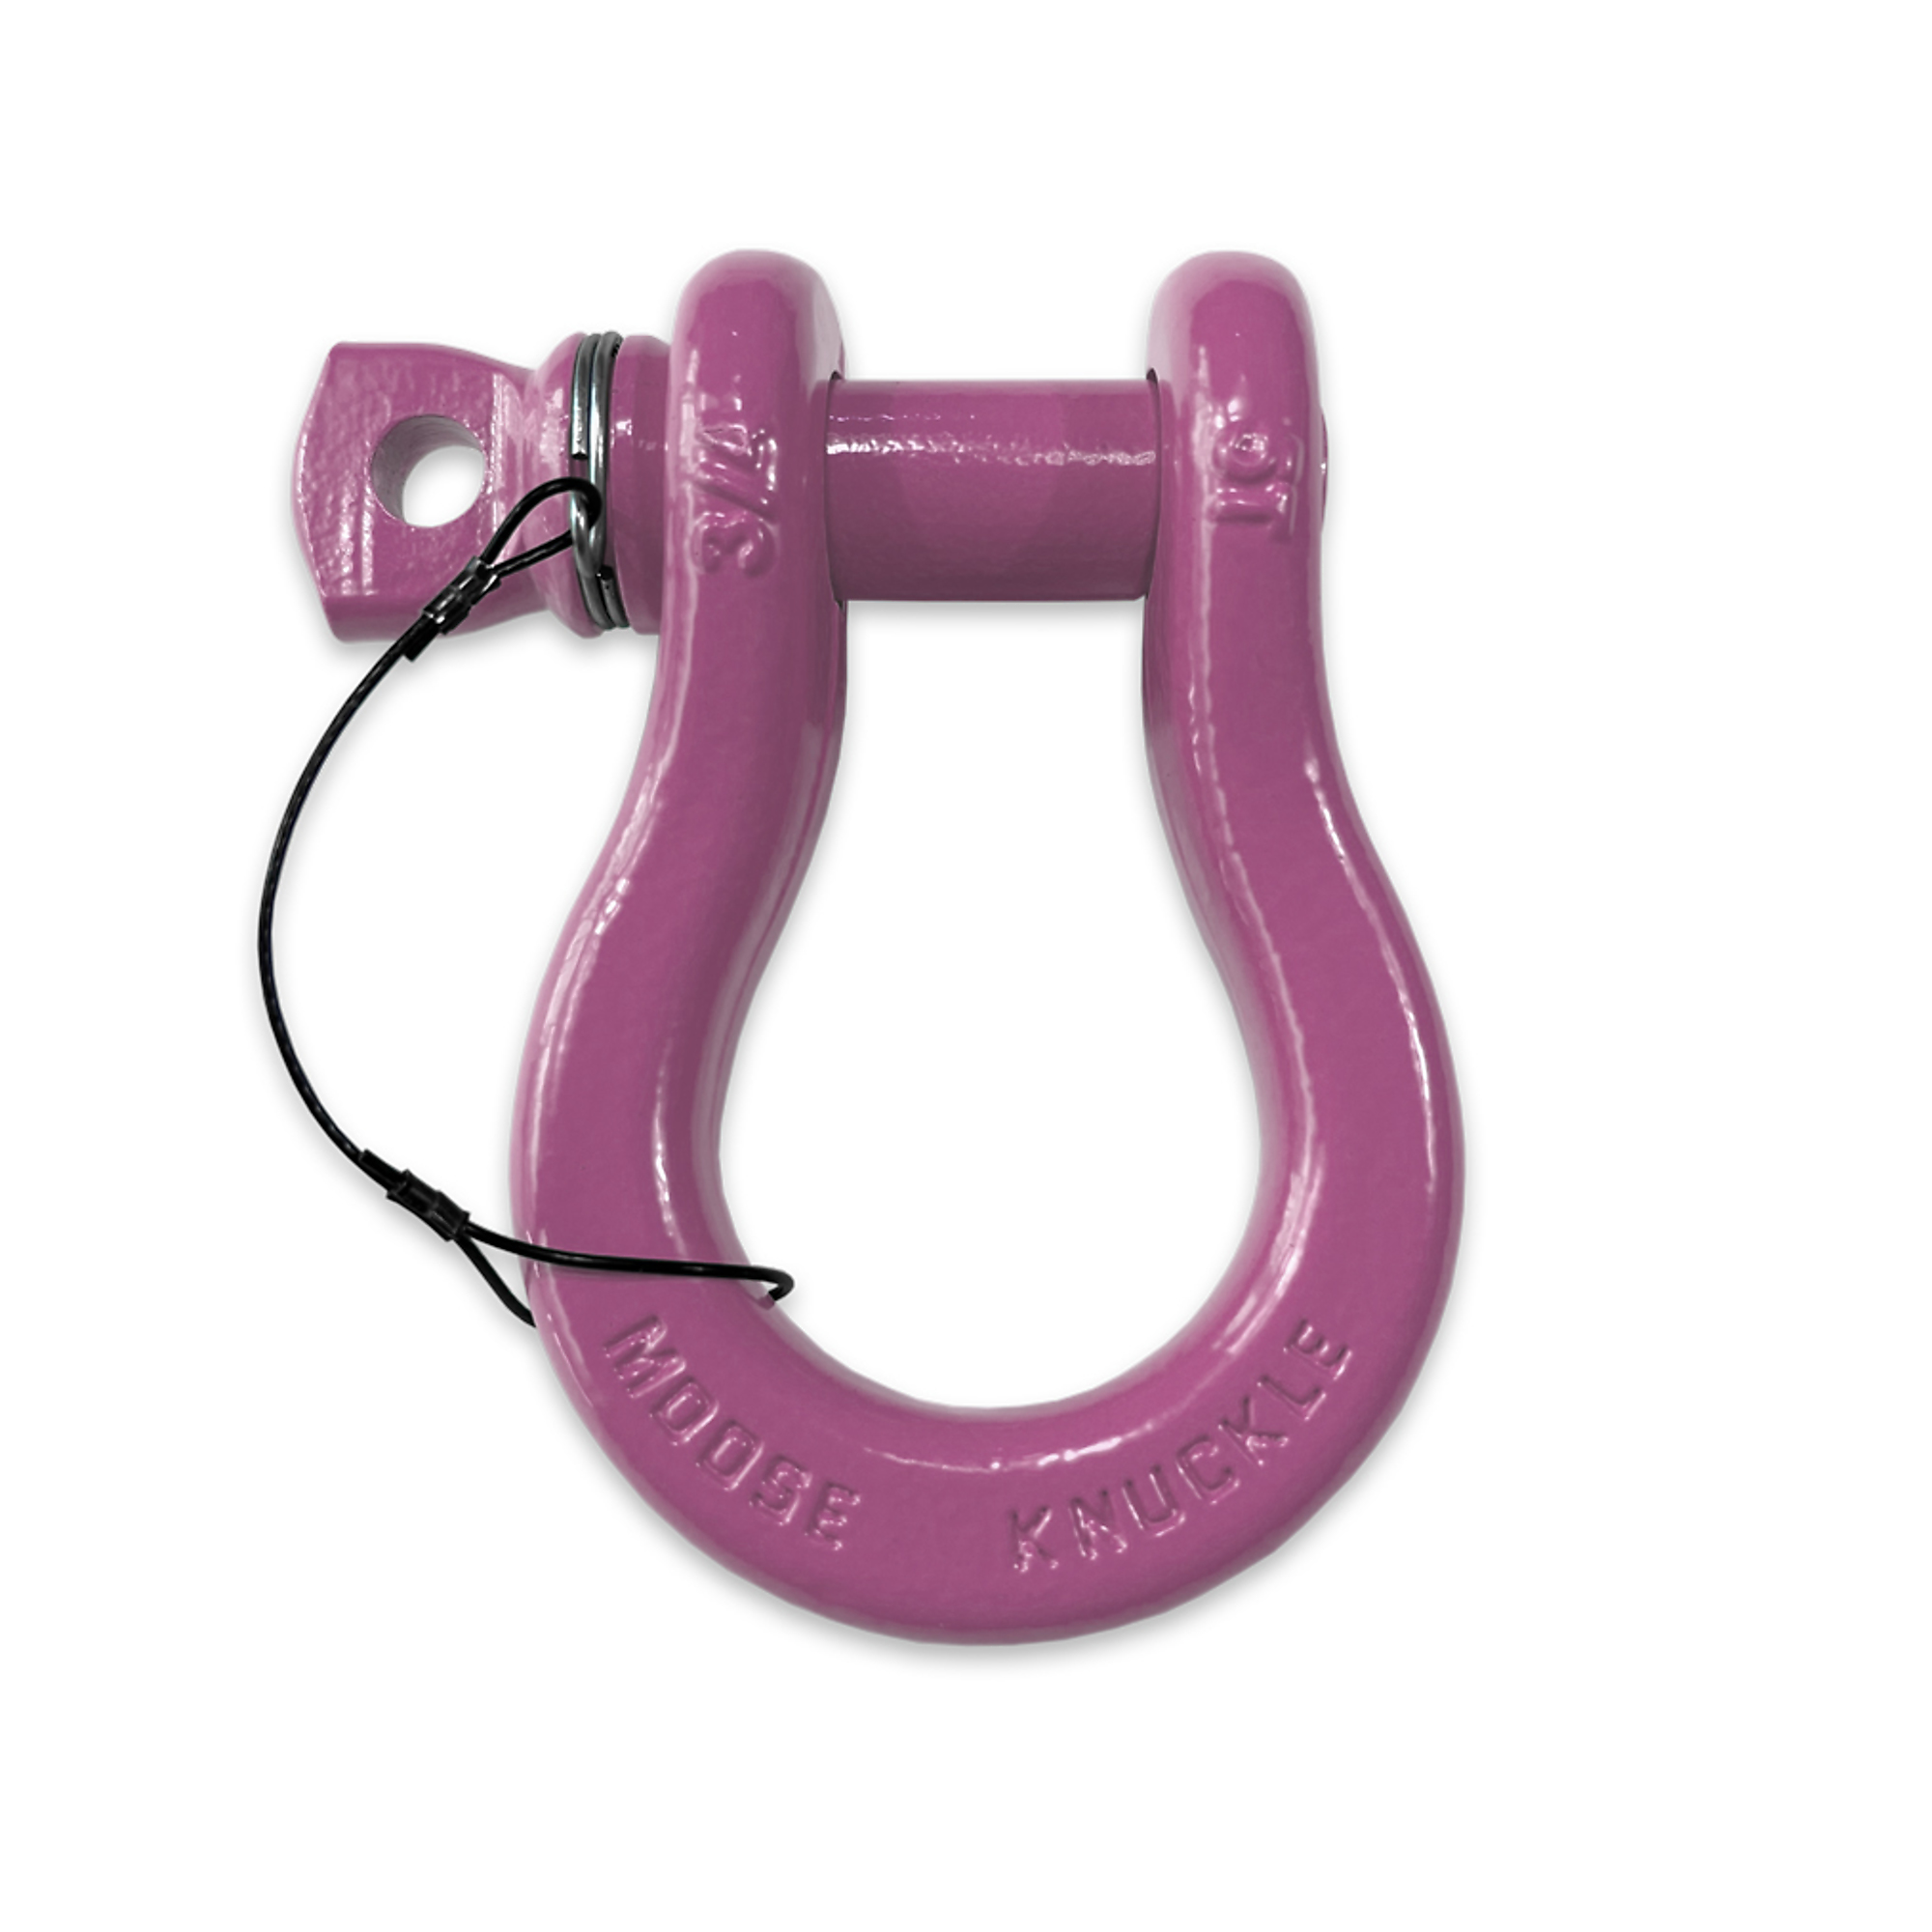 Moose Knuckle Offroad, Pretty Pink Recovery Tow Lanyard Spin Pin 3/4 Shackle, Working Load Limit 10000 lb, Model FN000023-010